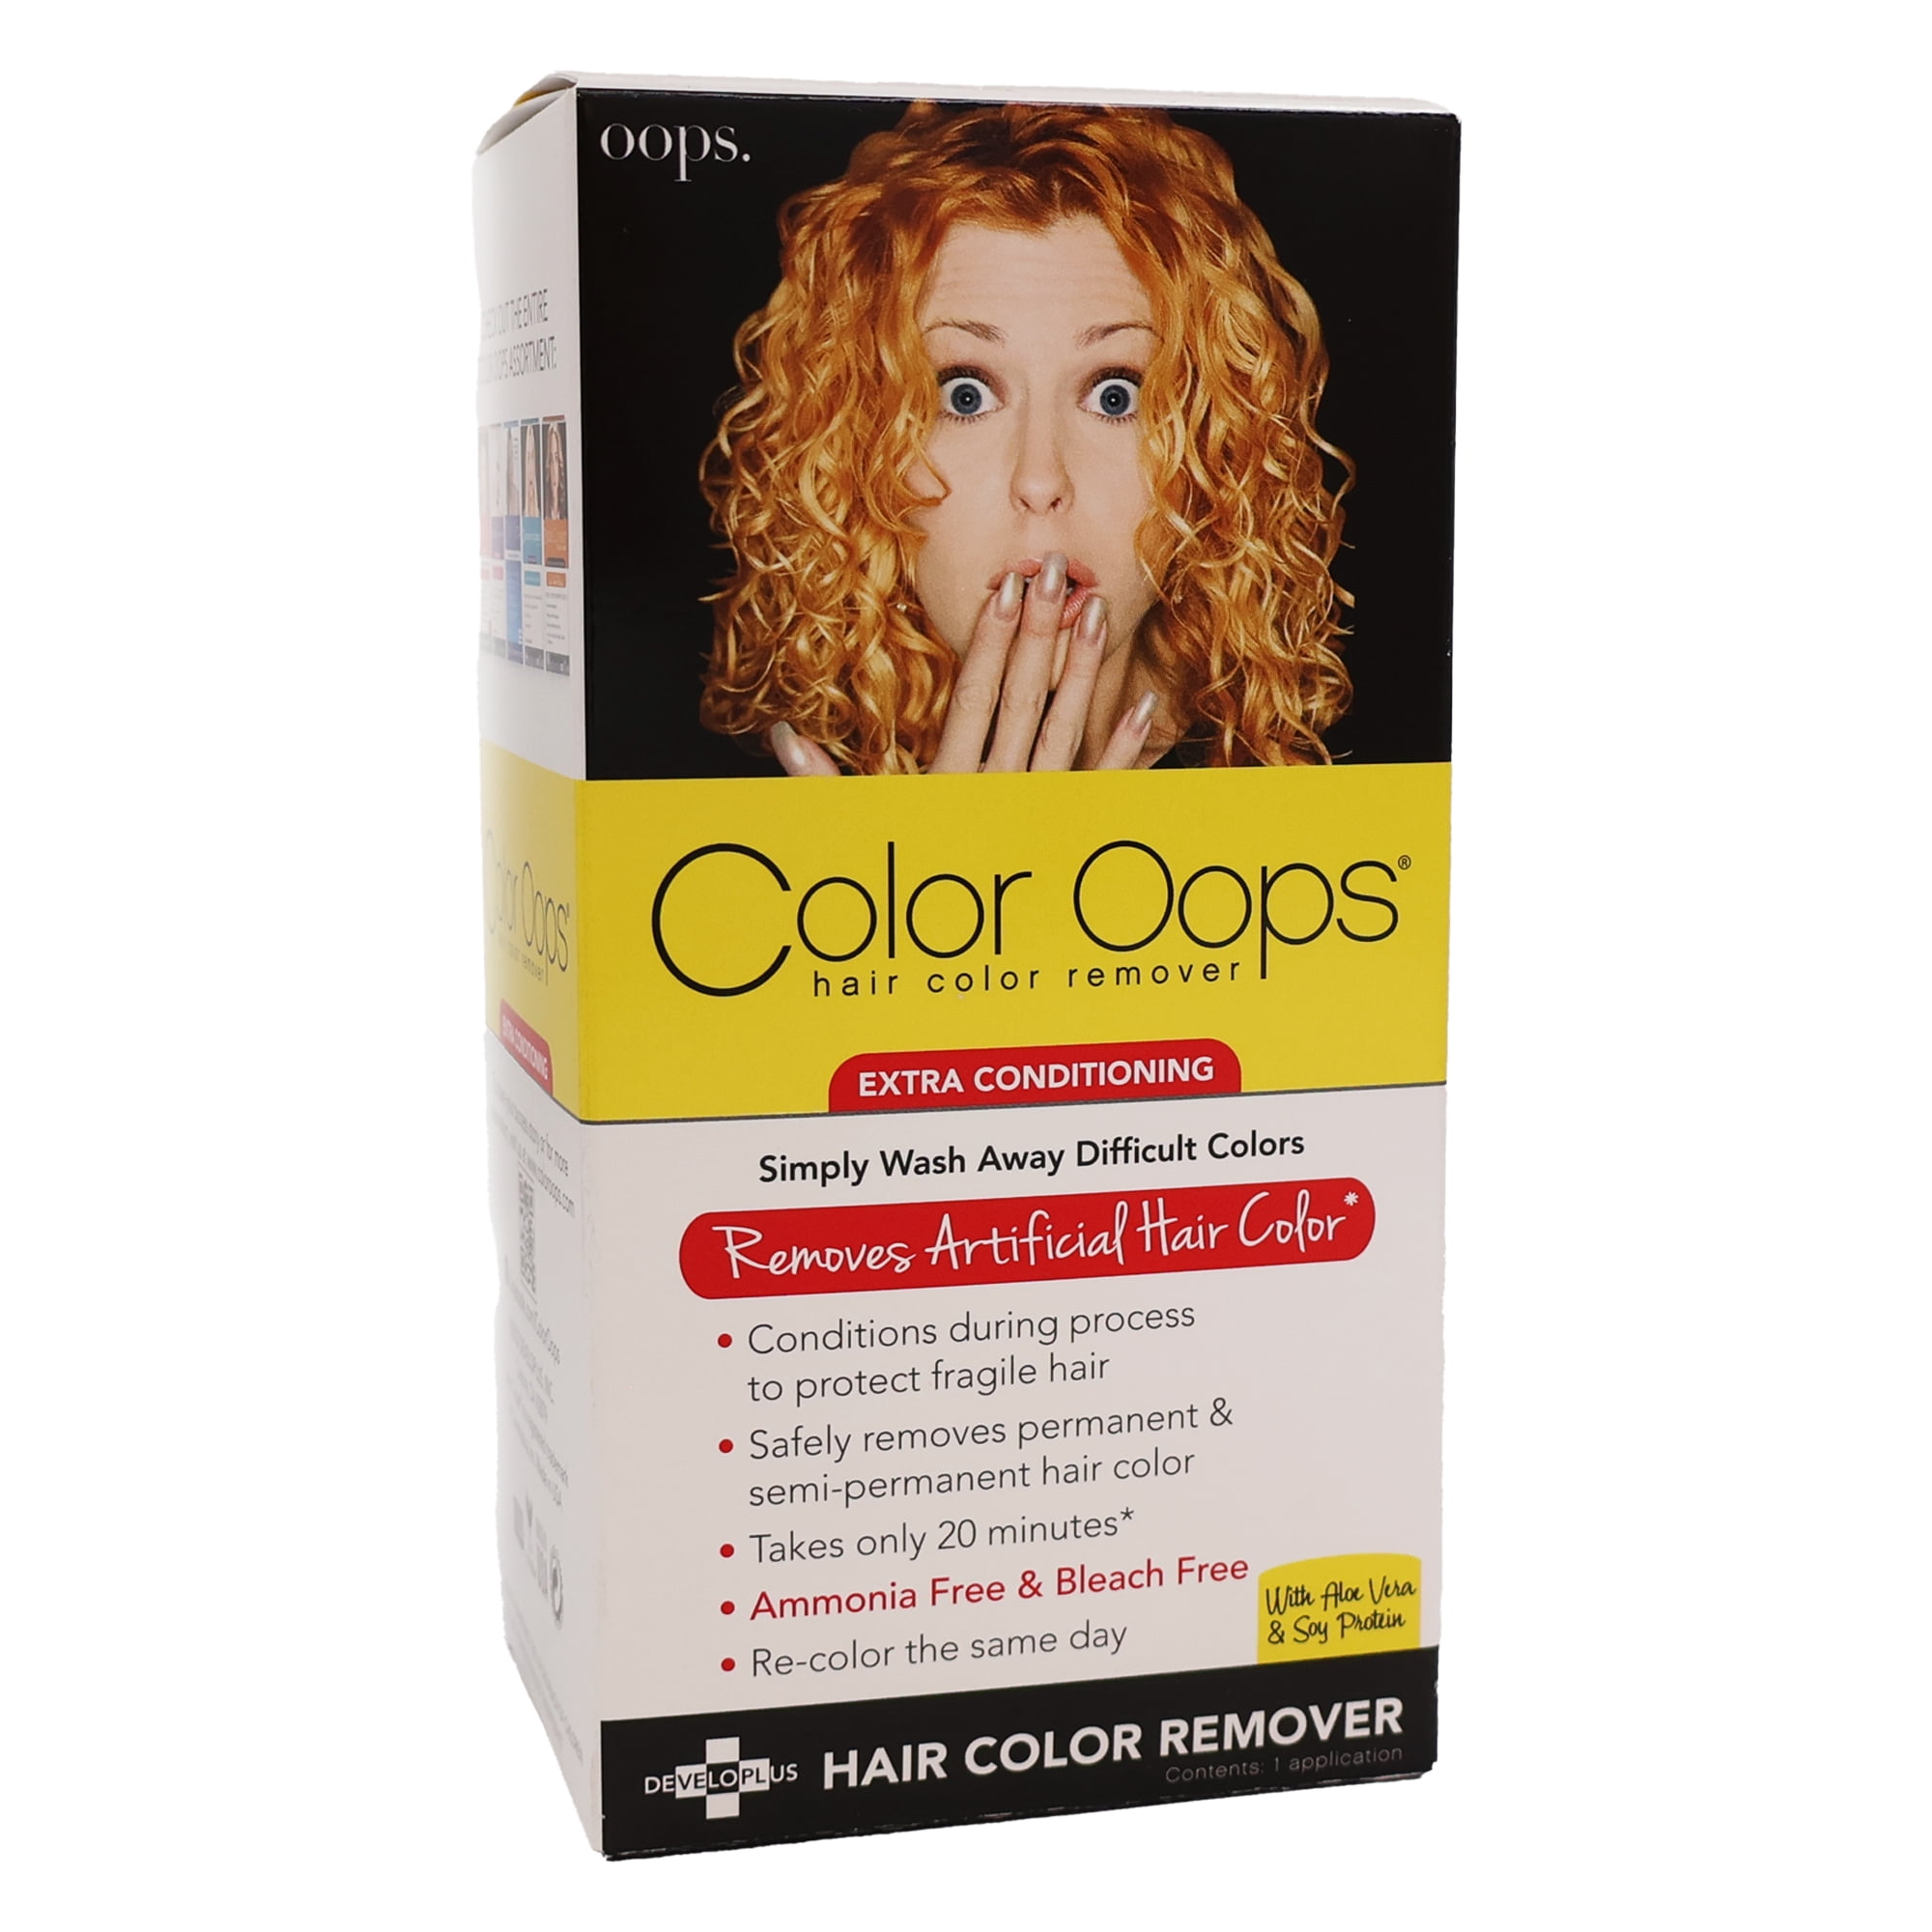 Color Oops Extra Conditioning Hair Color Remover, Pack of 6 